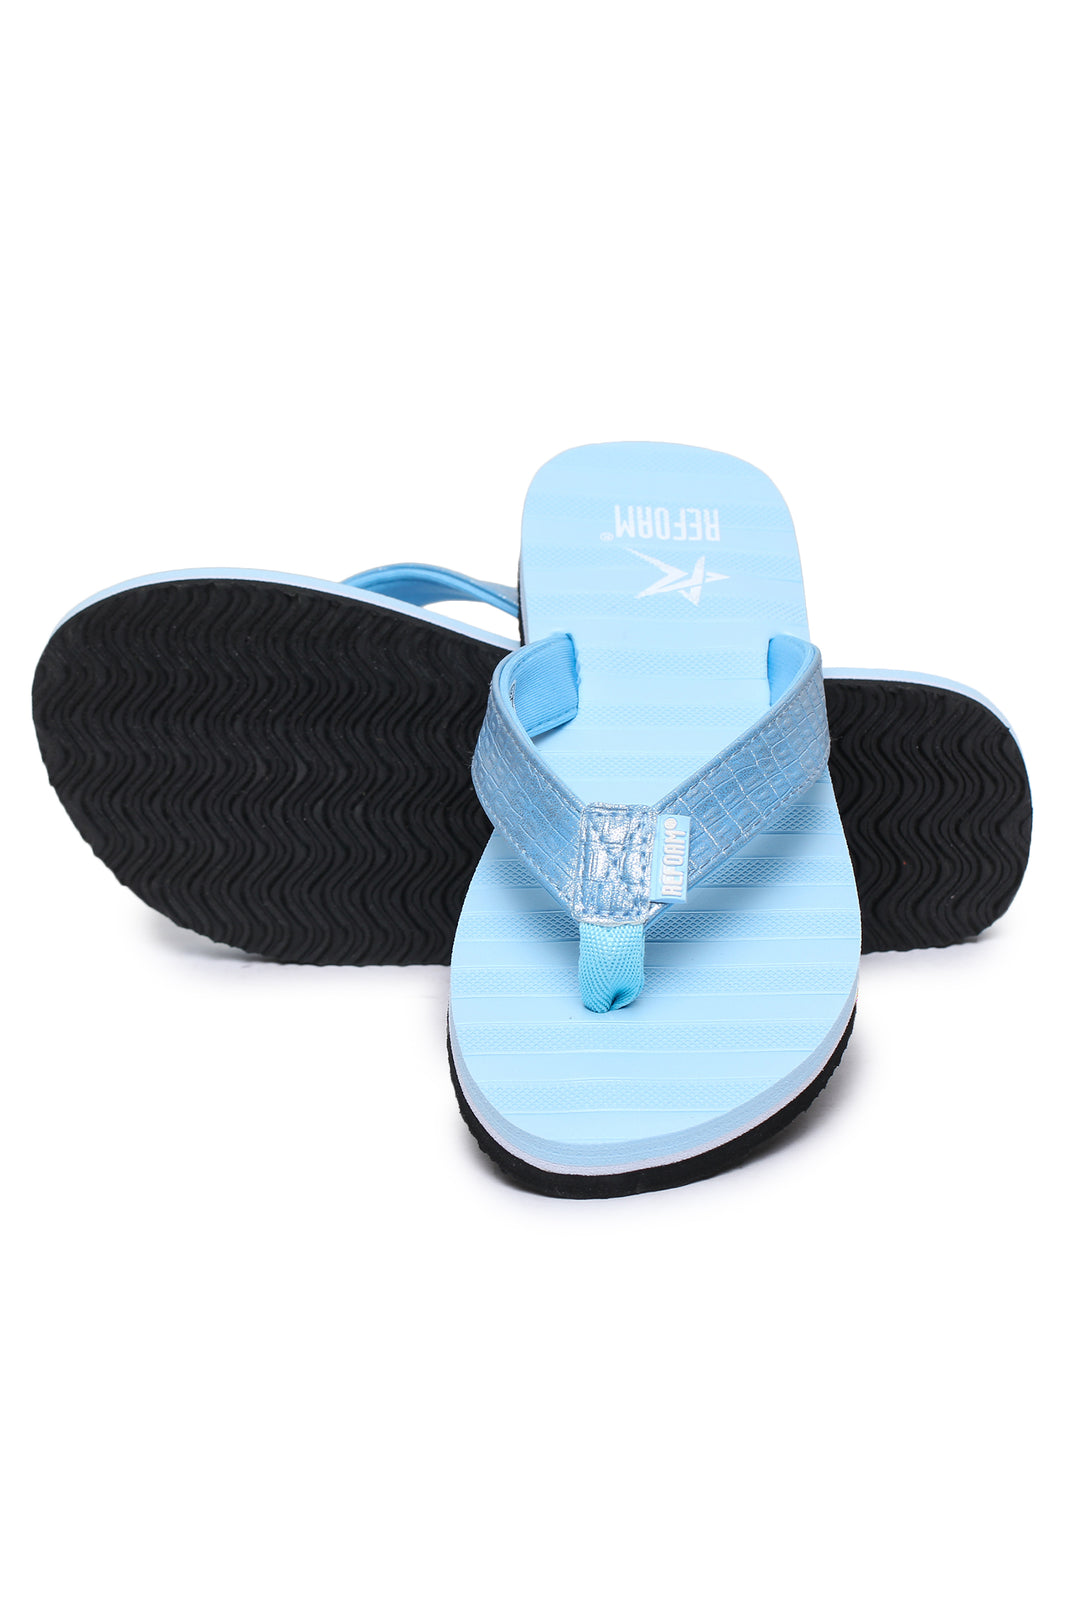 Blue Solid Leather Slip On Casual Slippers For Women